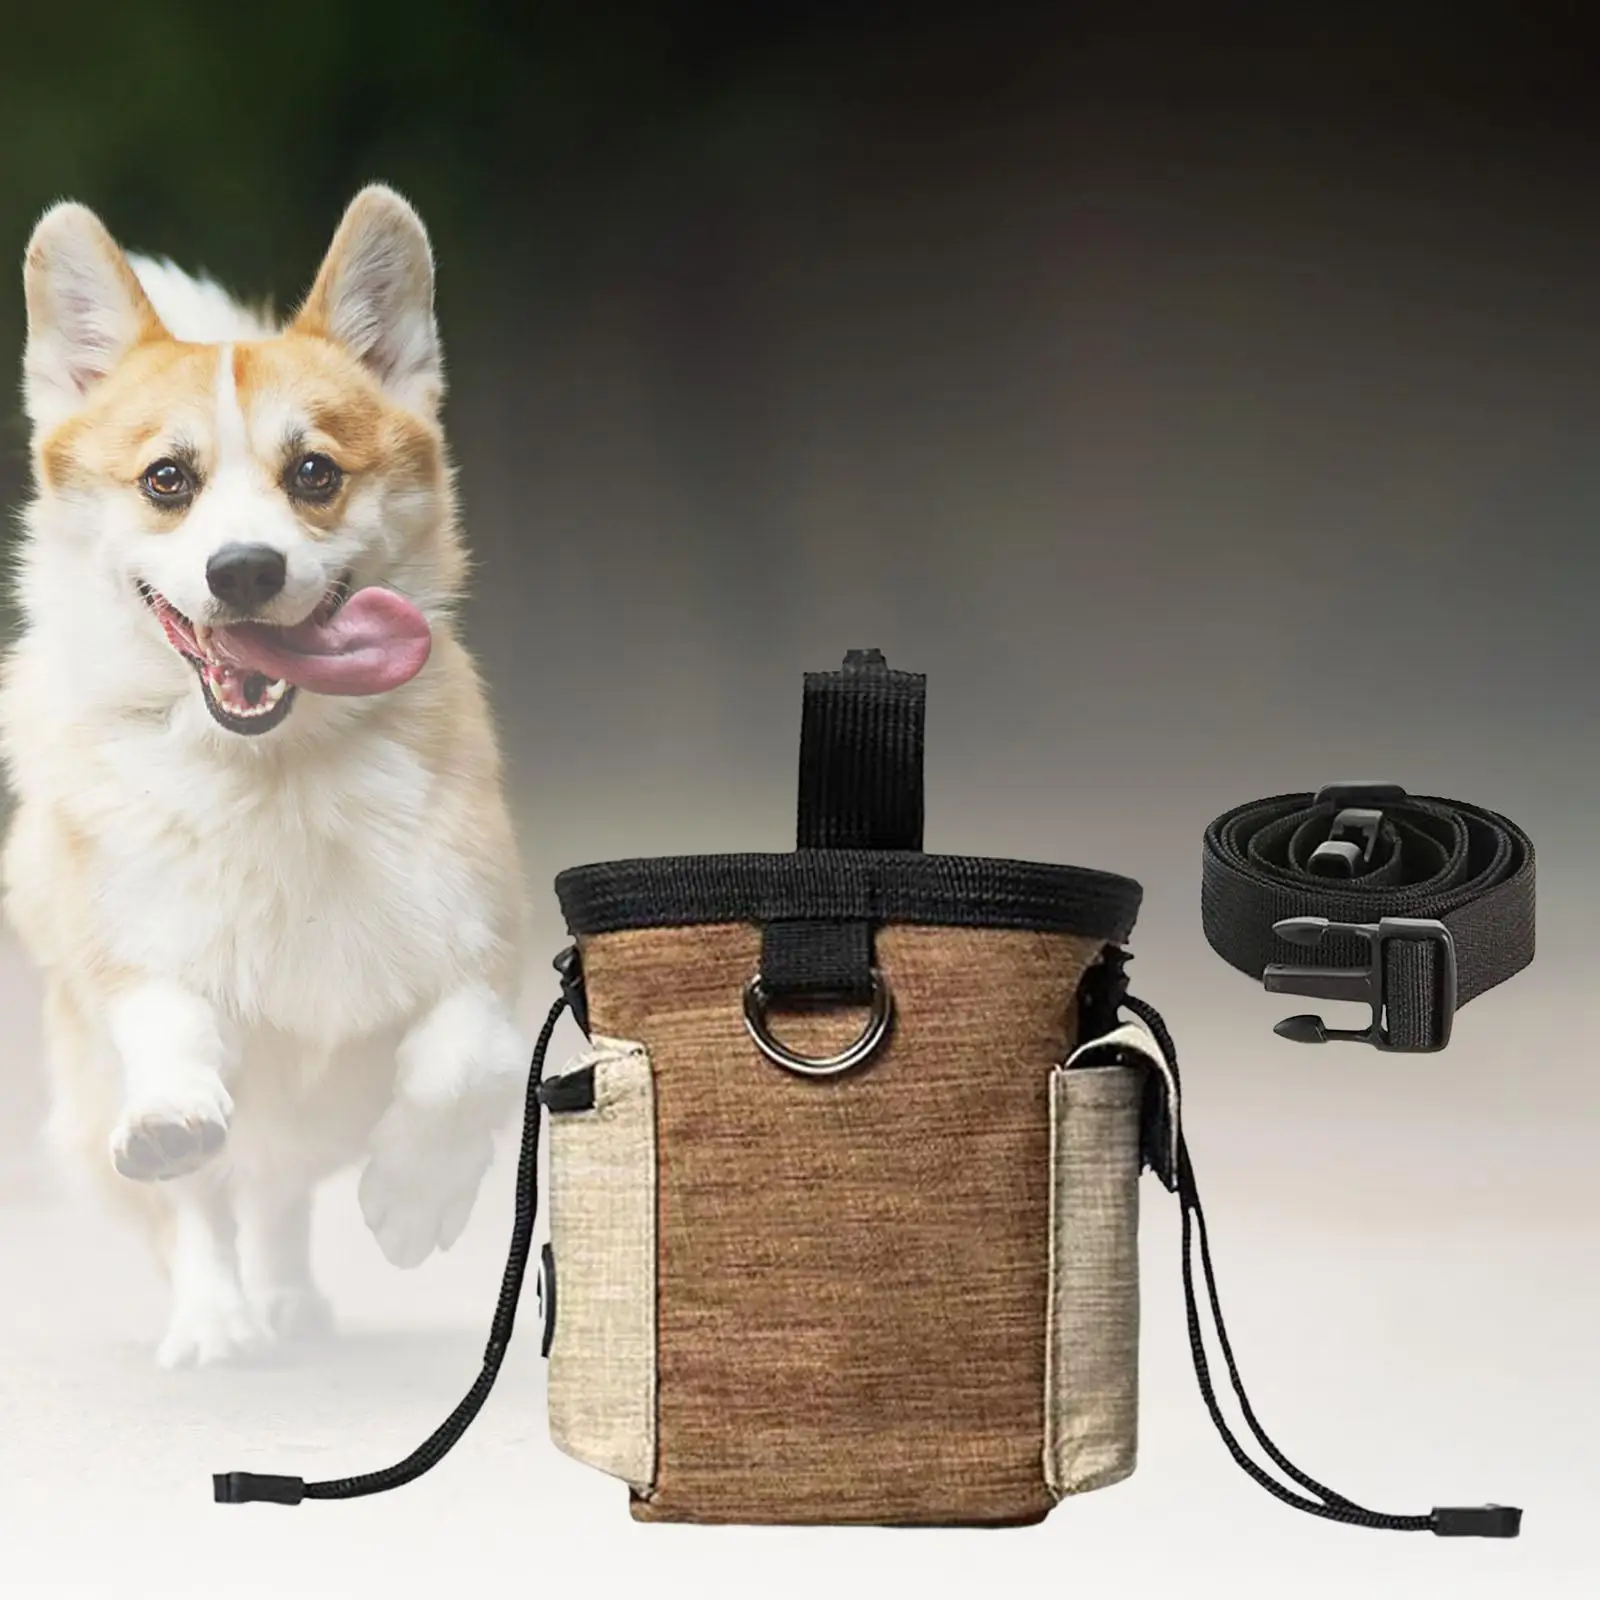 Treat Dog Pouch with Waist Shoulder Strap Poop Bag Dispenser Drawstring with Buckle Dog Training Bag for Travel Running Hiking